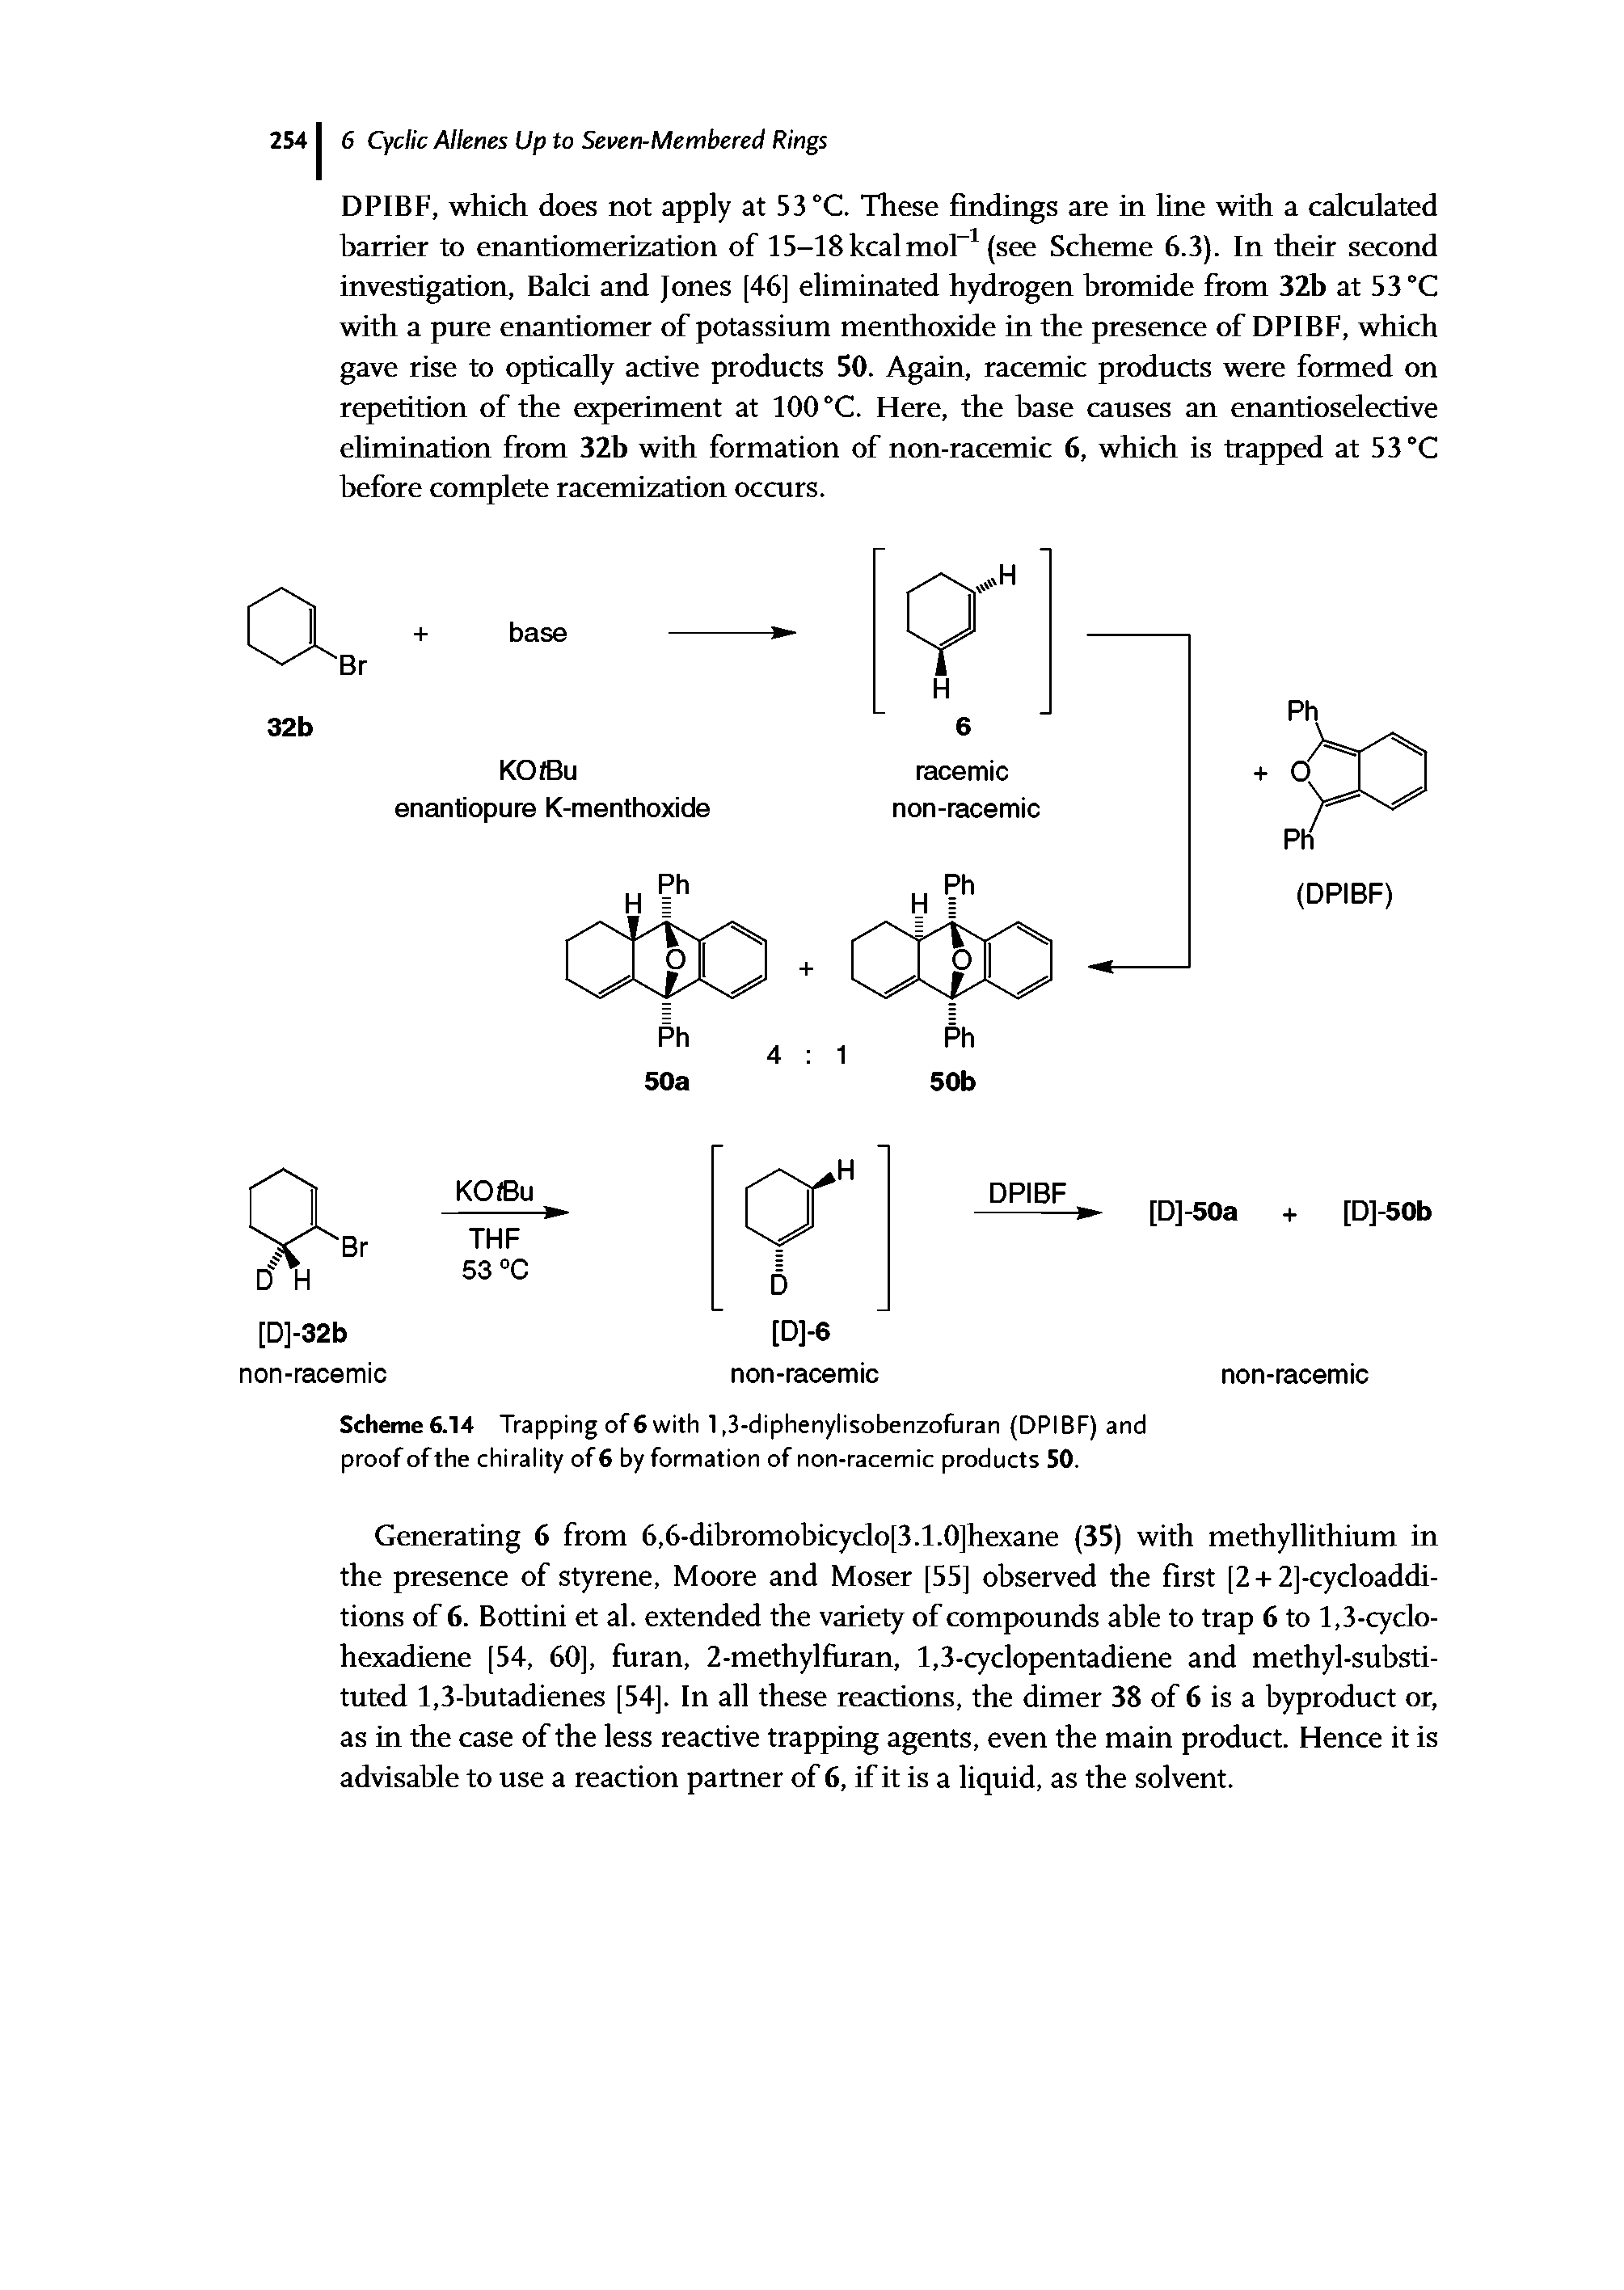 Scheme 6.14 Trapping of 6 with 1,3-diphenylisobenzofuran (DPIBF) and proof ofthe chirality of6 by formation of non-racemic products 50.